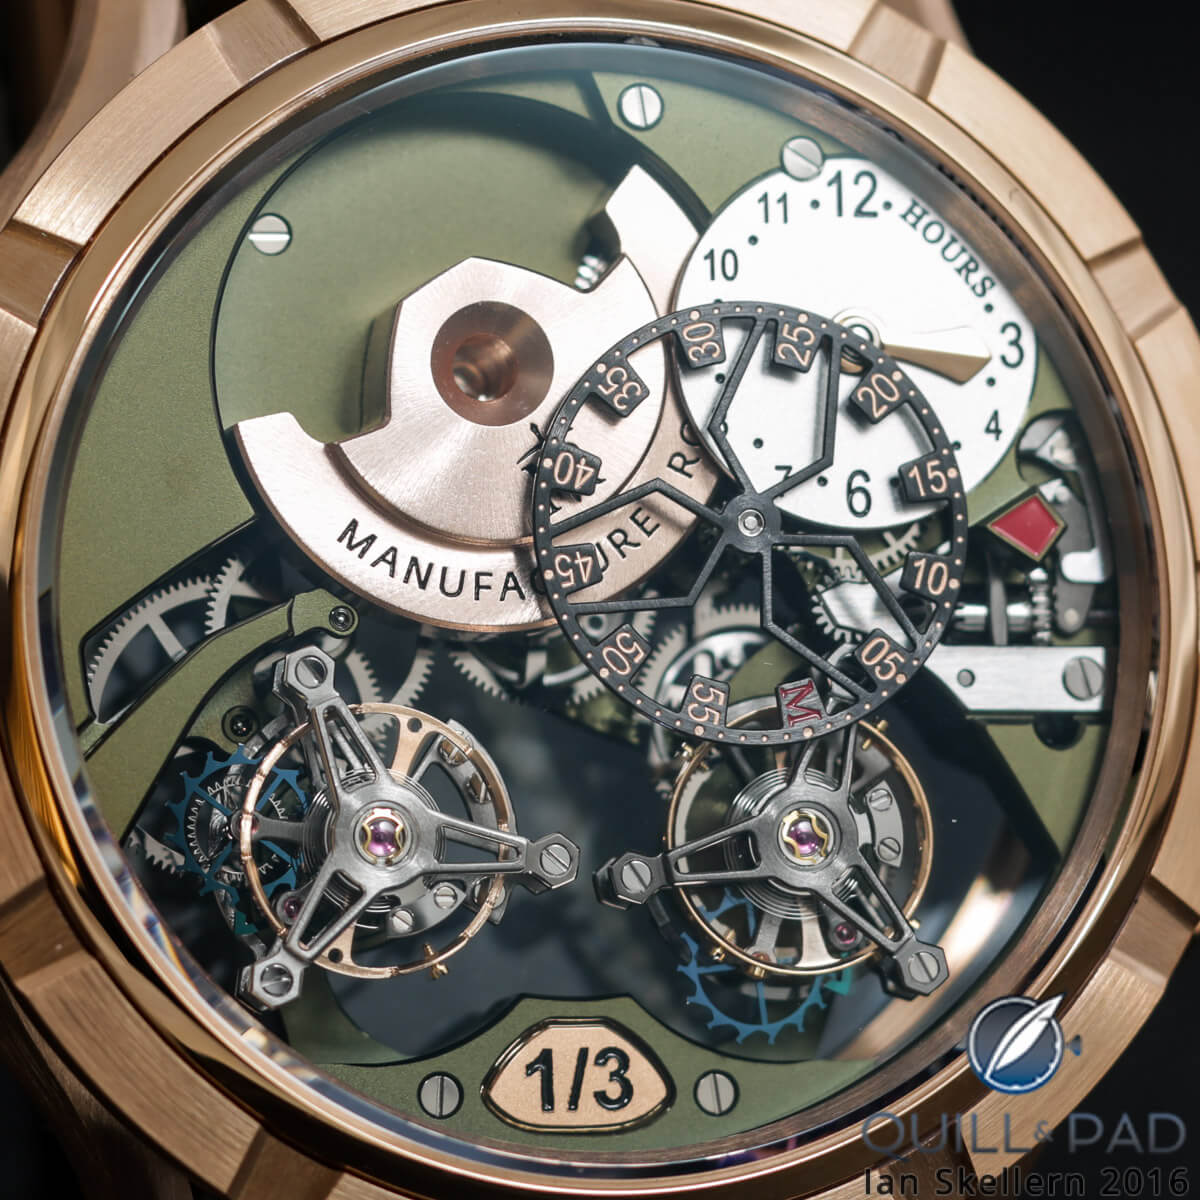 Manufacture Royale 1770 Micromégas Revolution in red gold with olive green movement